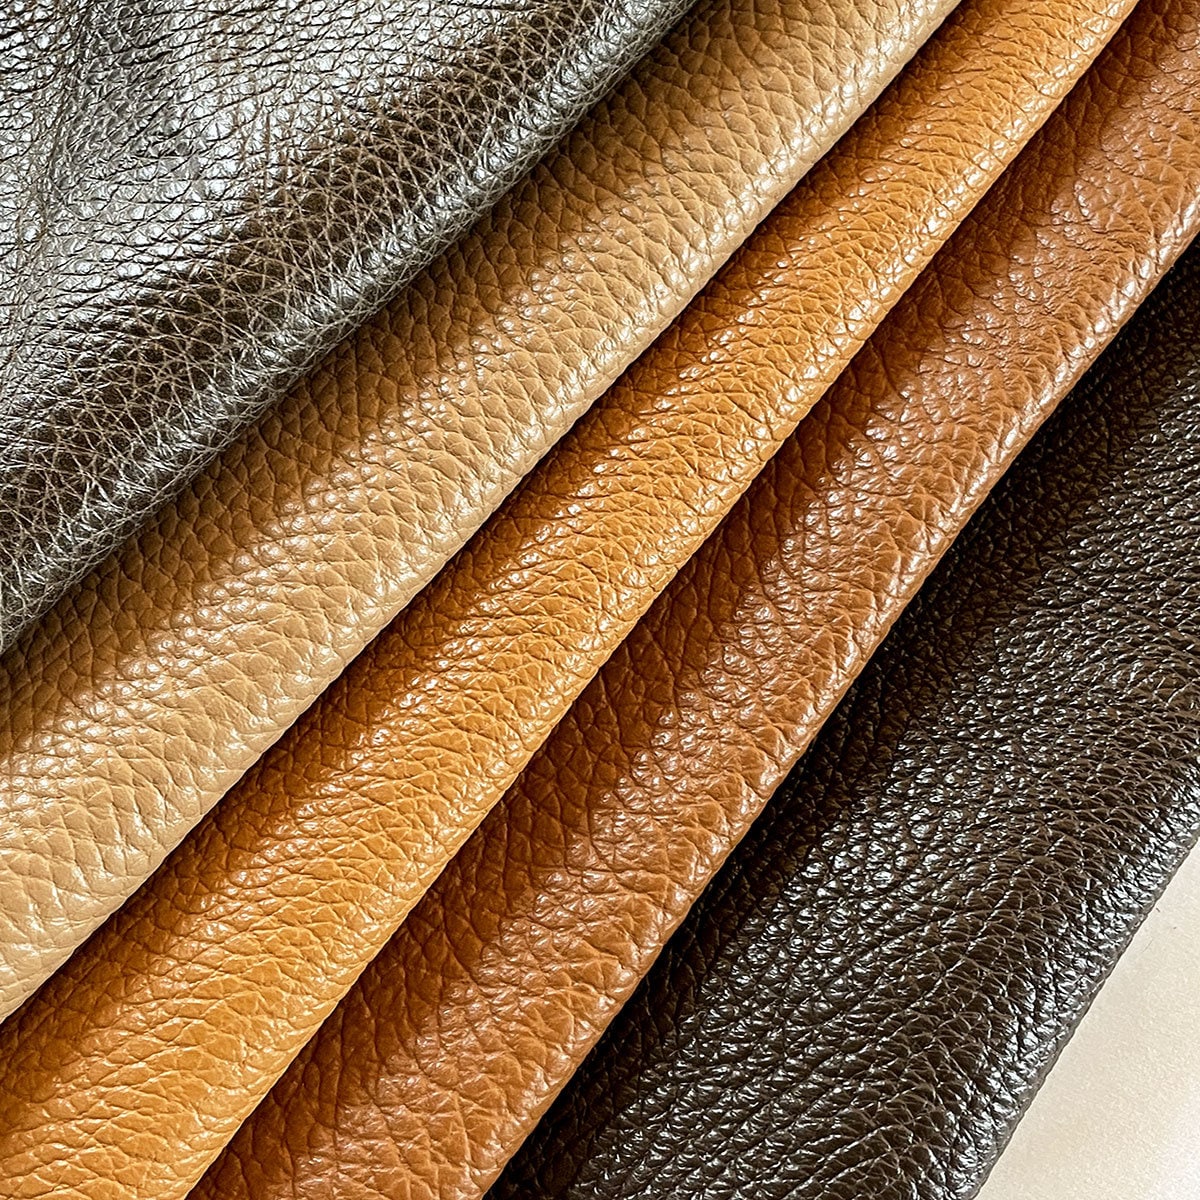 Pewter Soft Patina Upholstery leather for Furniture Coverings, Pebble Cow  Leather, Genuine Italian Skins for Crafts and DIY, Dollaro Leather